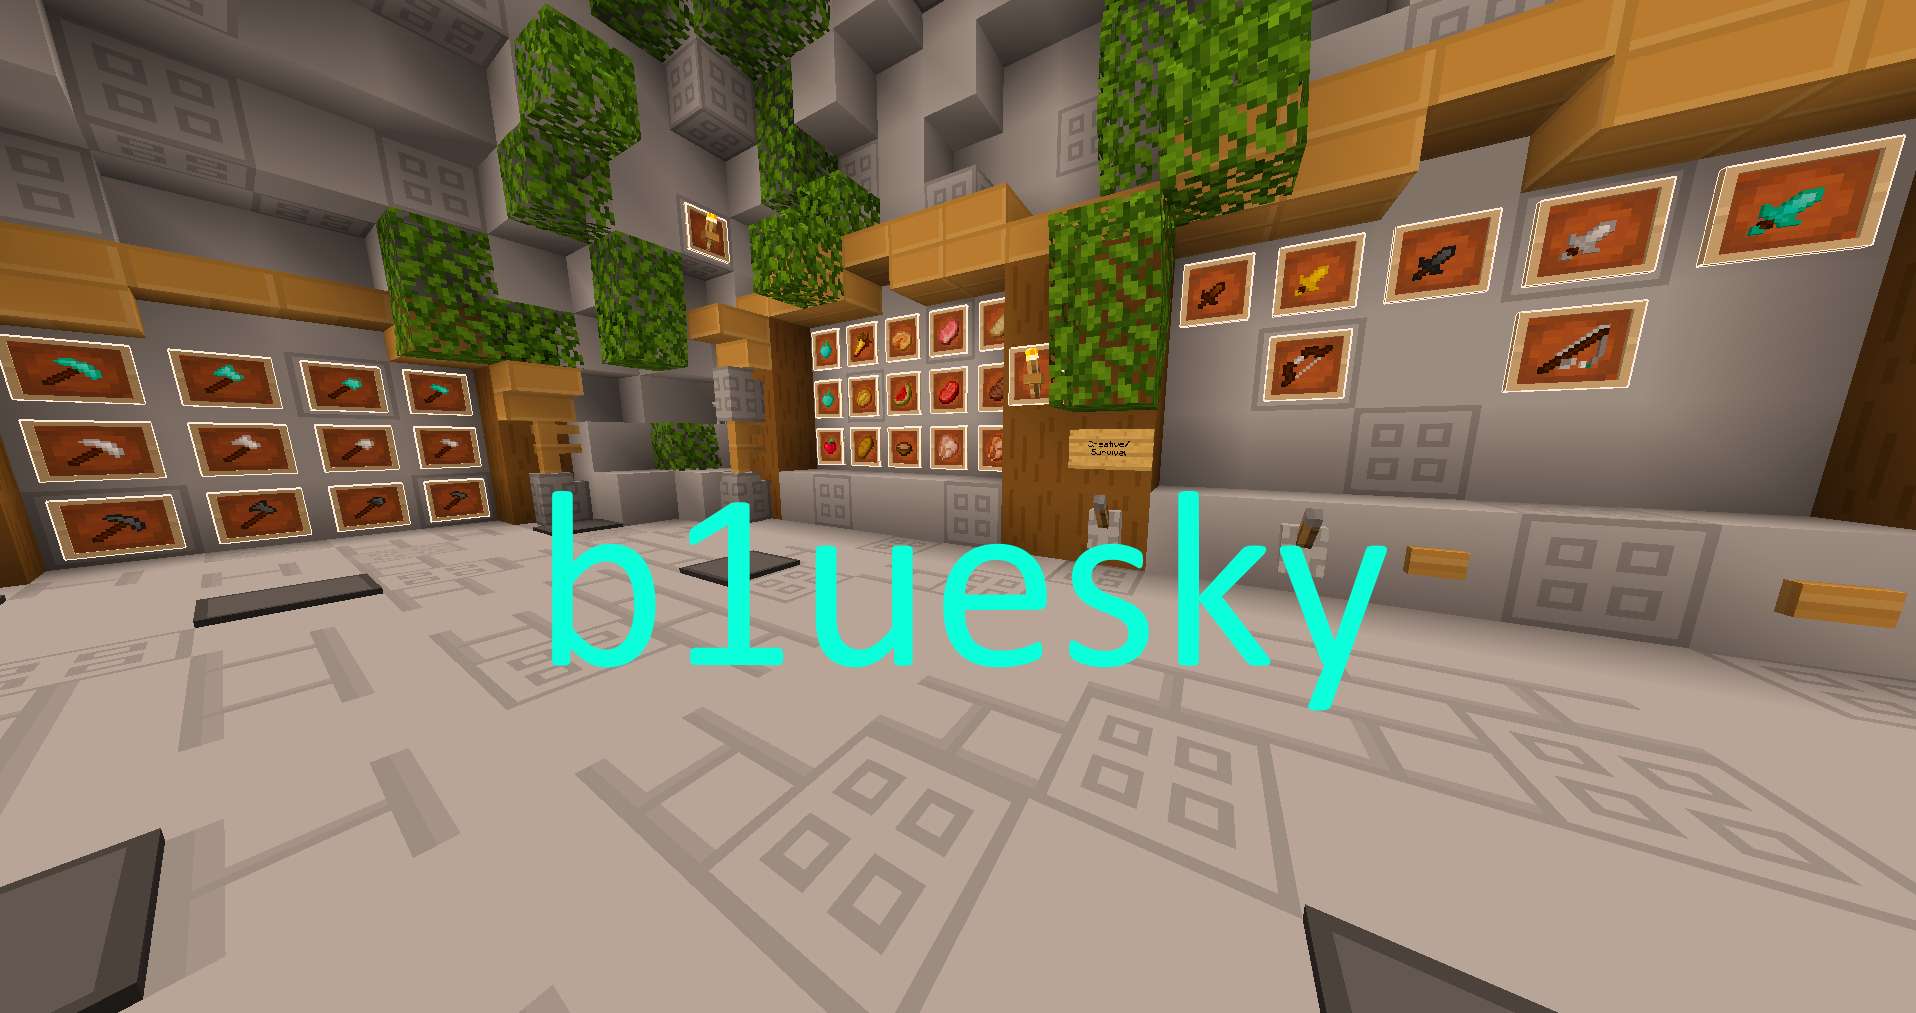 b1uesky 16x by Douyao on PvPRP